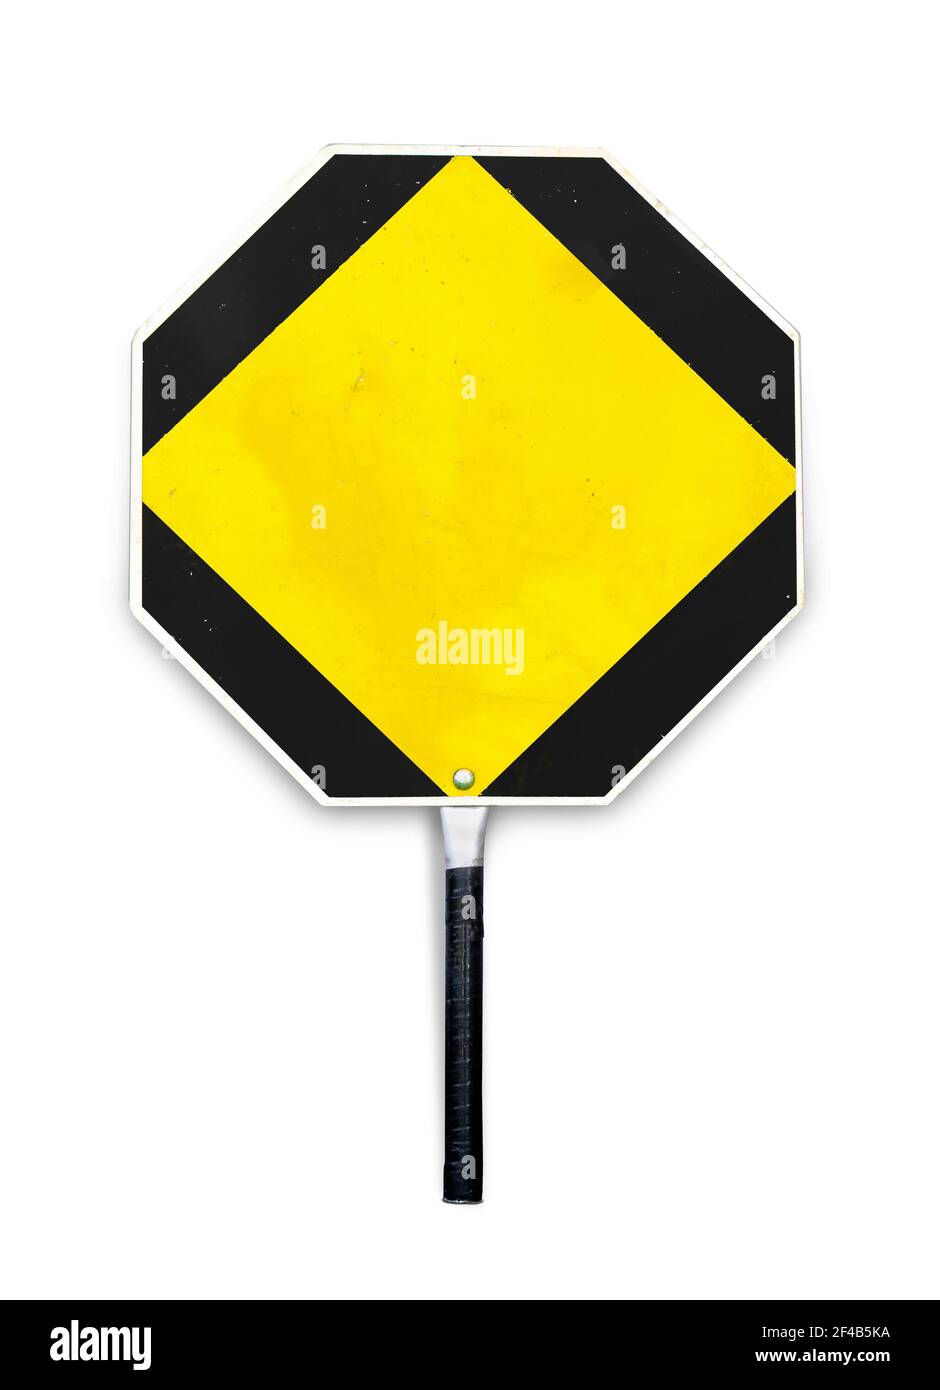 Blank yellow stop sign used for traffic control by crossing guards, police or work zones. Octagon hand-held paddle stop sign template or mockup. Aged Stock Photo